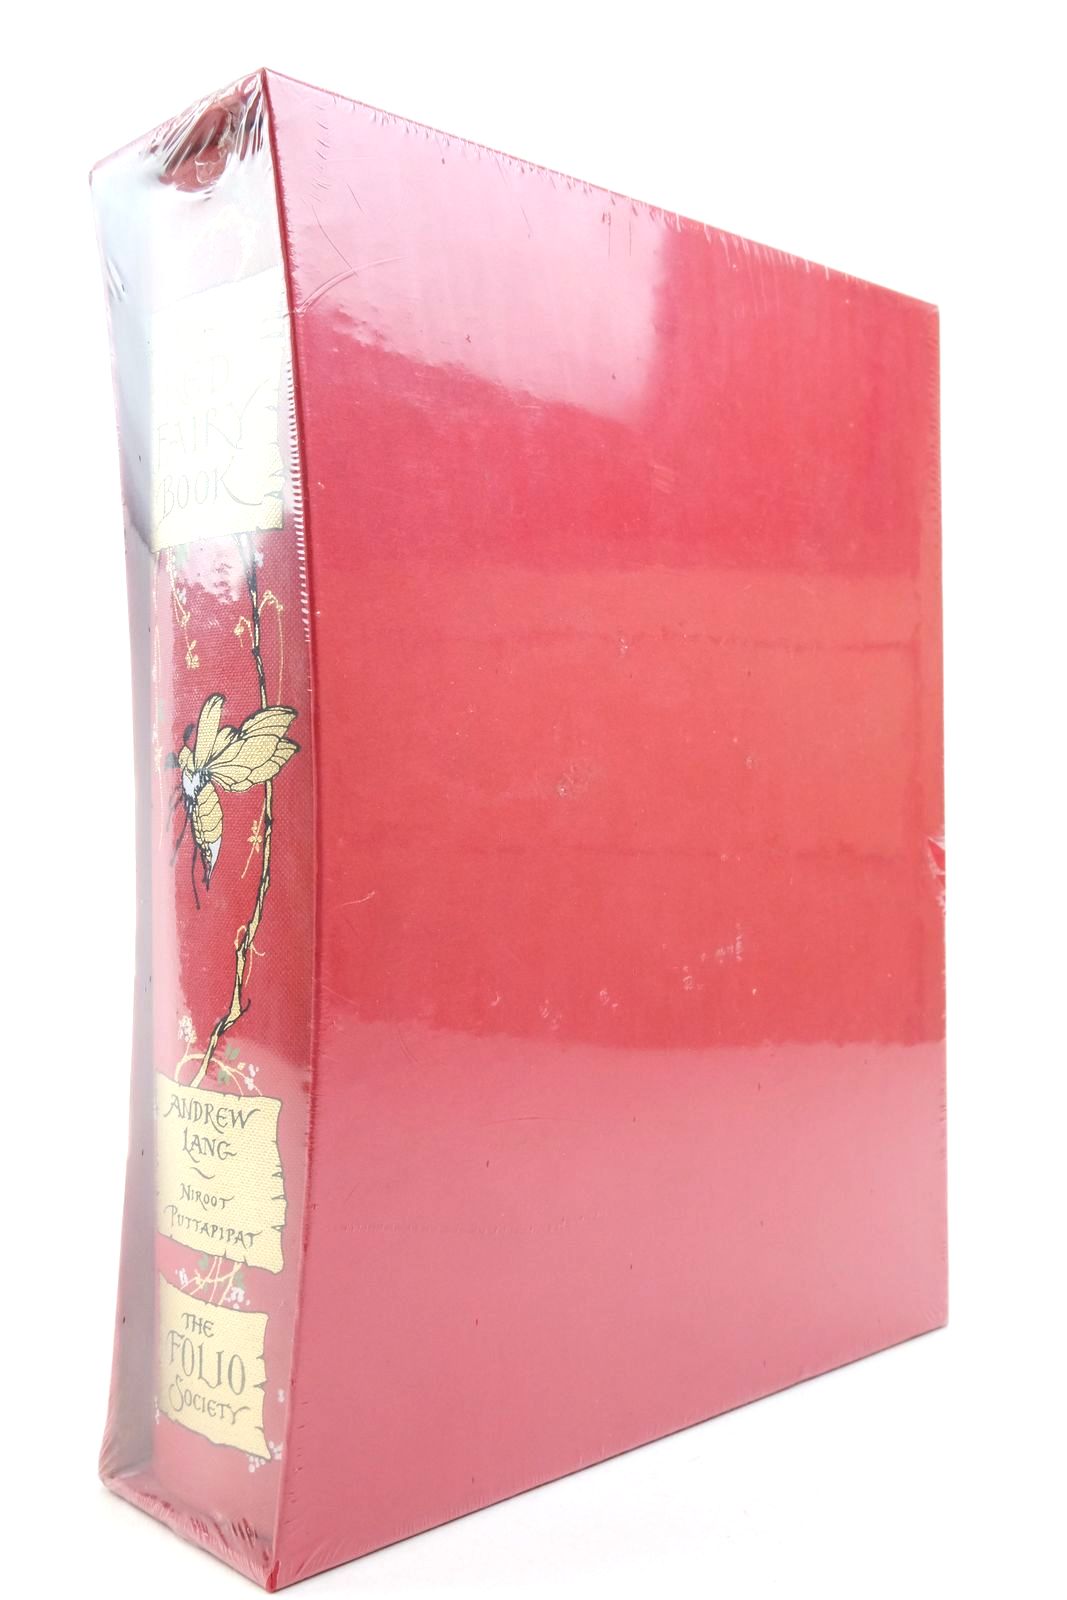 Photo of THE RED FAIRY BOOK written by Lang, Andrew illustrated by Puttapipat, Niroot published by Folio Society (STOCK CODE: 2137241)  for sale by Stella & Rose's Books